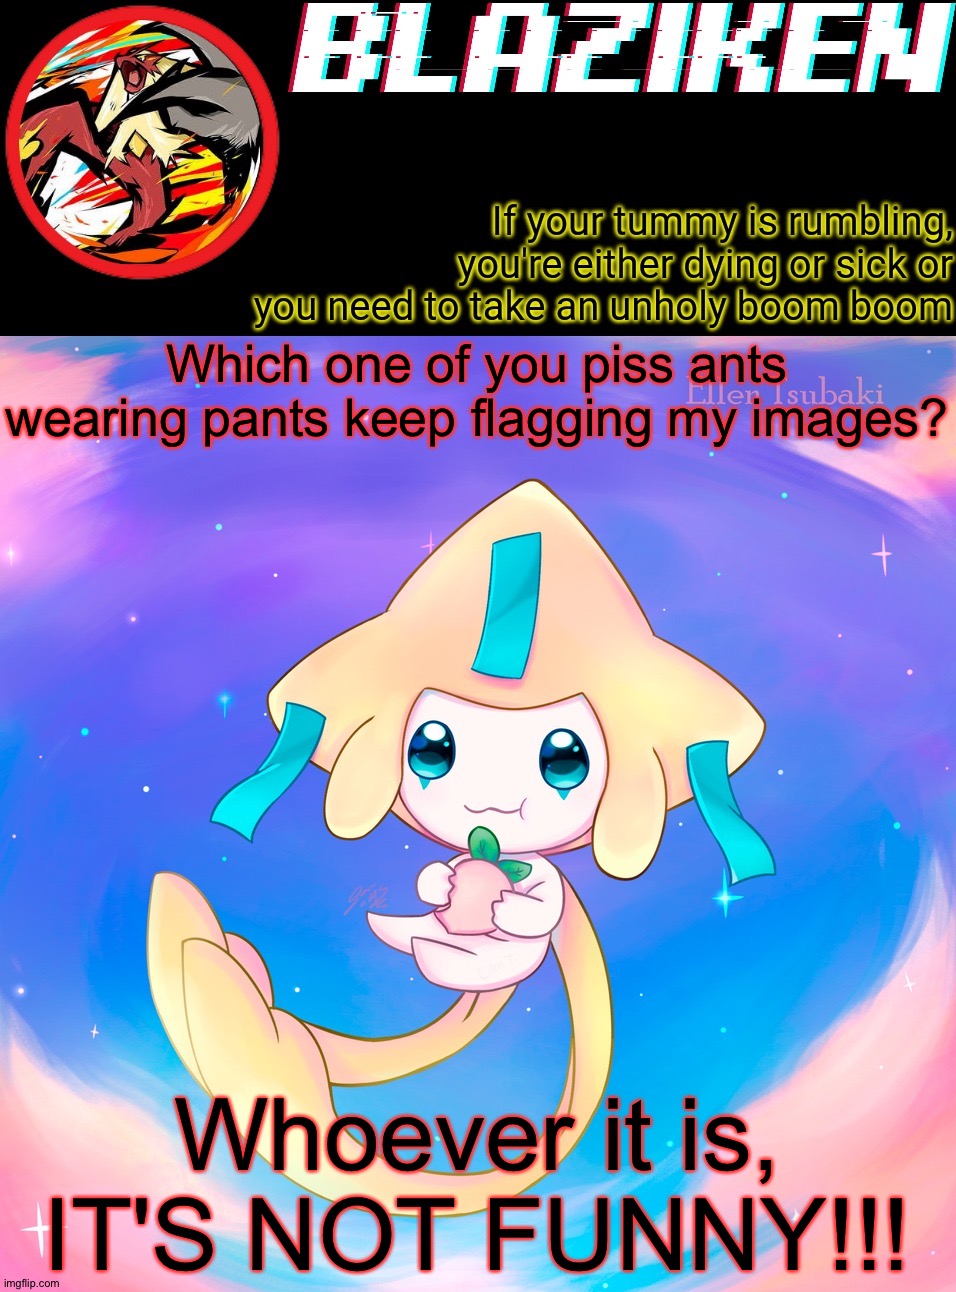 Stop. Please. | Which one of you piss ants wearing pants keep flagging my images? Whoever it is, IT'S NOT FUNNY!!! | image tagged in blaziken's jirachi temp | made w/ Imgflip meme maker